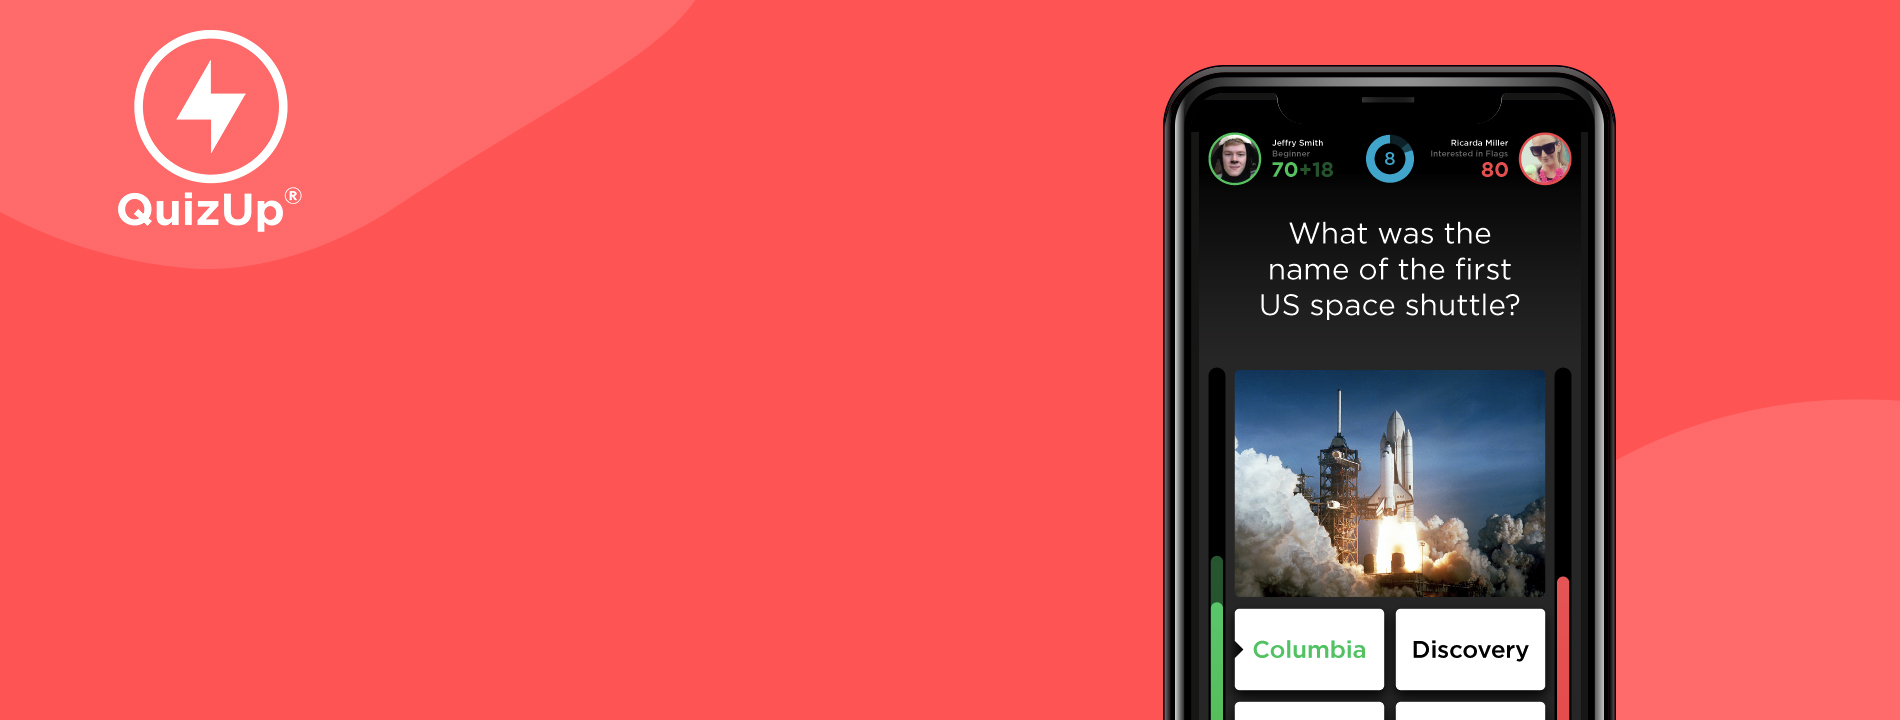 Live chat quizup